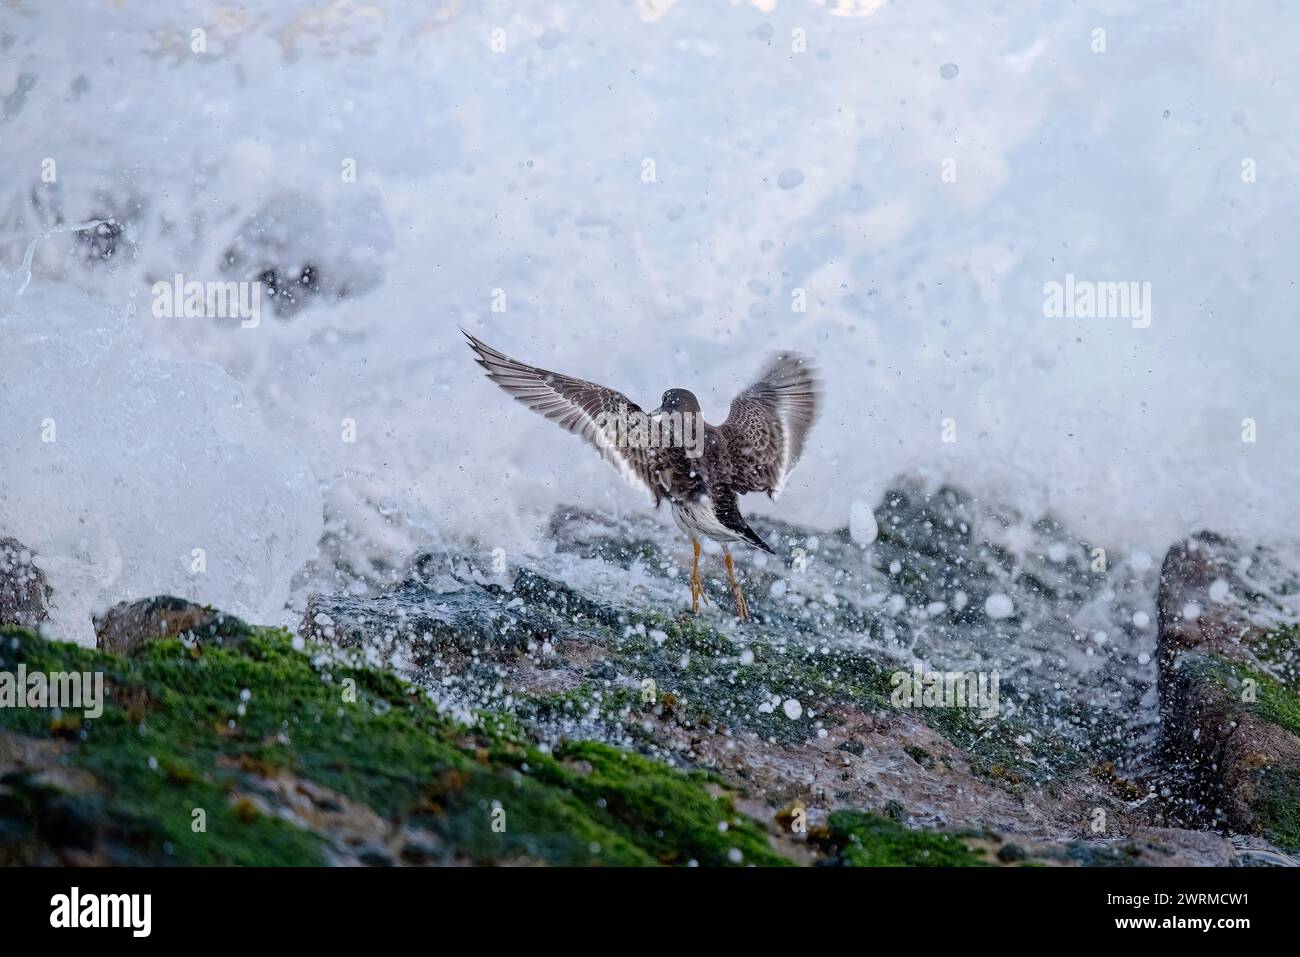 In a dynamic display, a dusky sandpiper spreads its wings, ready to take flight amidst a burst of sea spray on a rocky coast Stock Photo